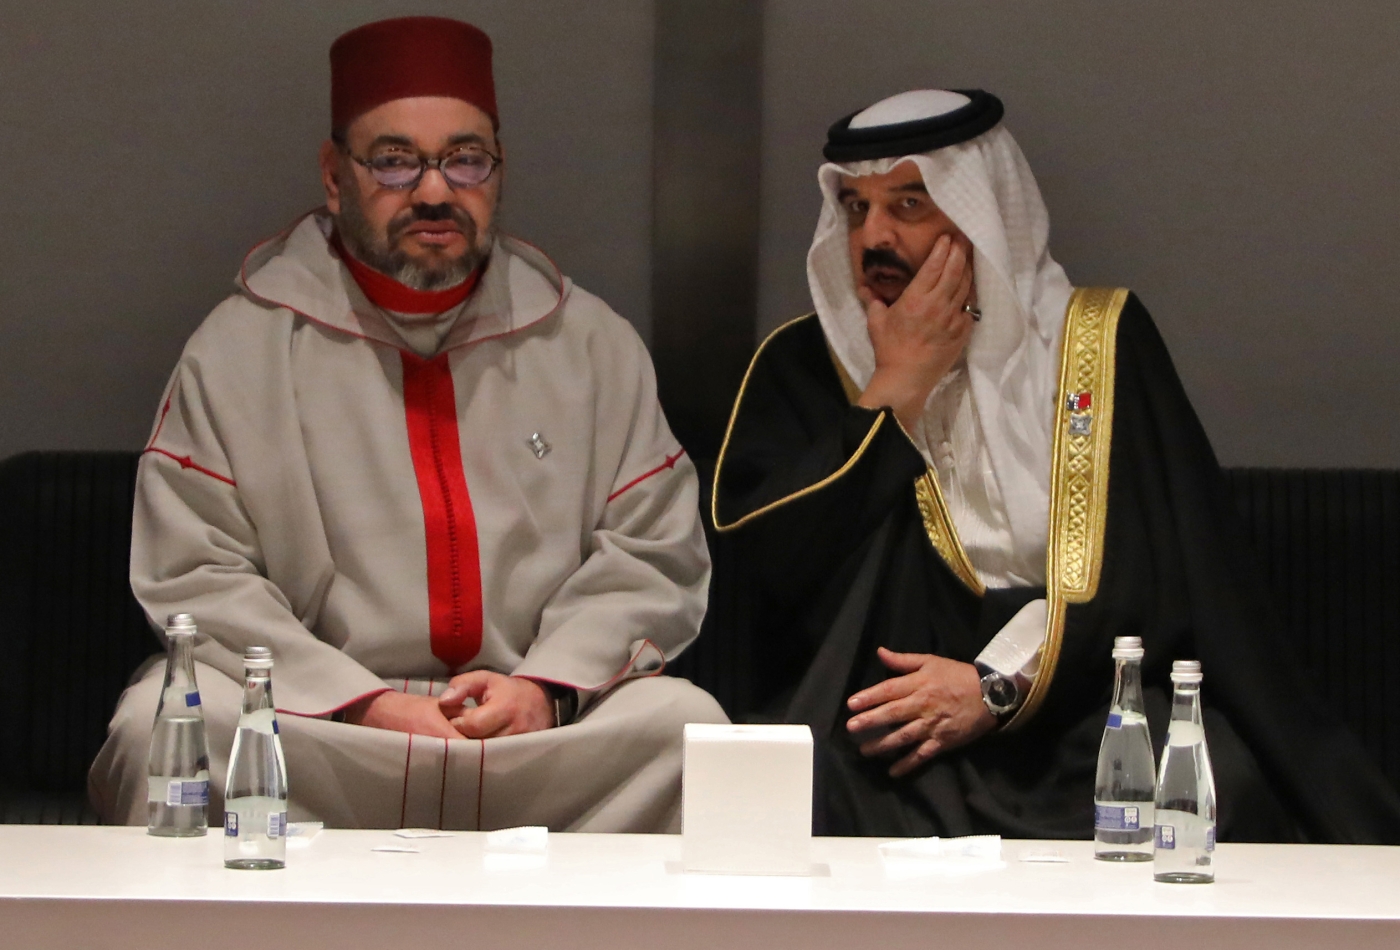 The decision to open the consulate came after a phone call between King Mohammed VI and King Hamad bin Isa al-Khalifa of Bahrain